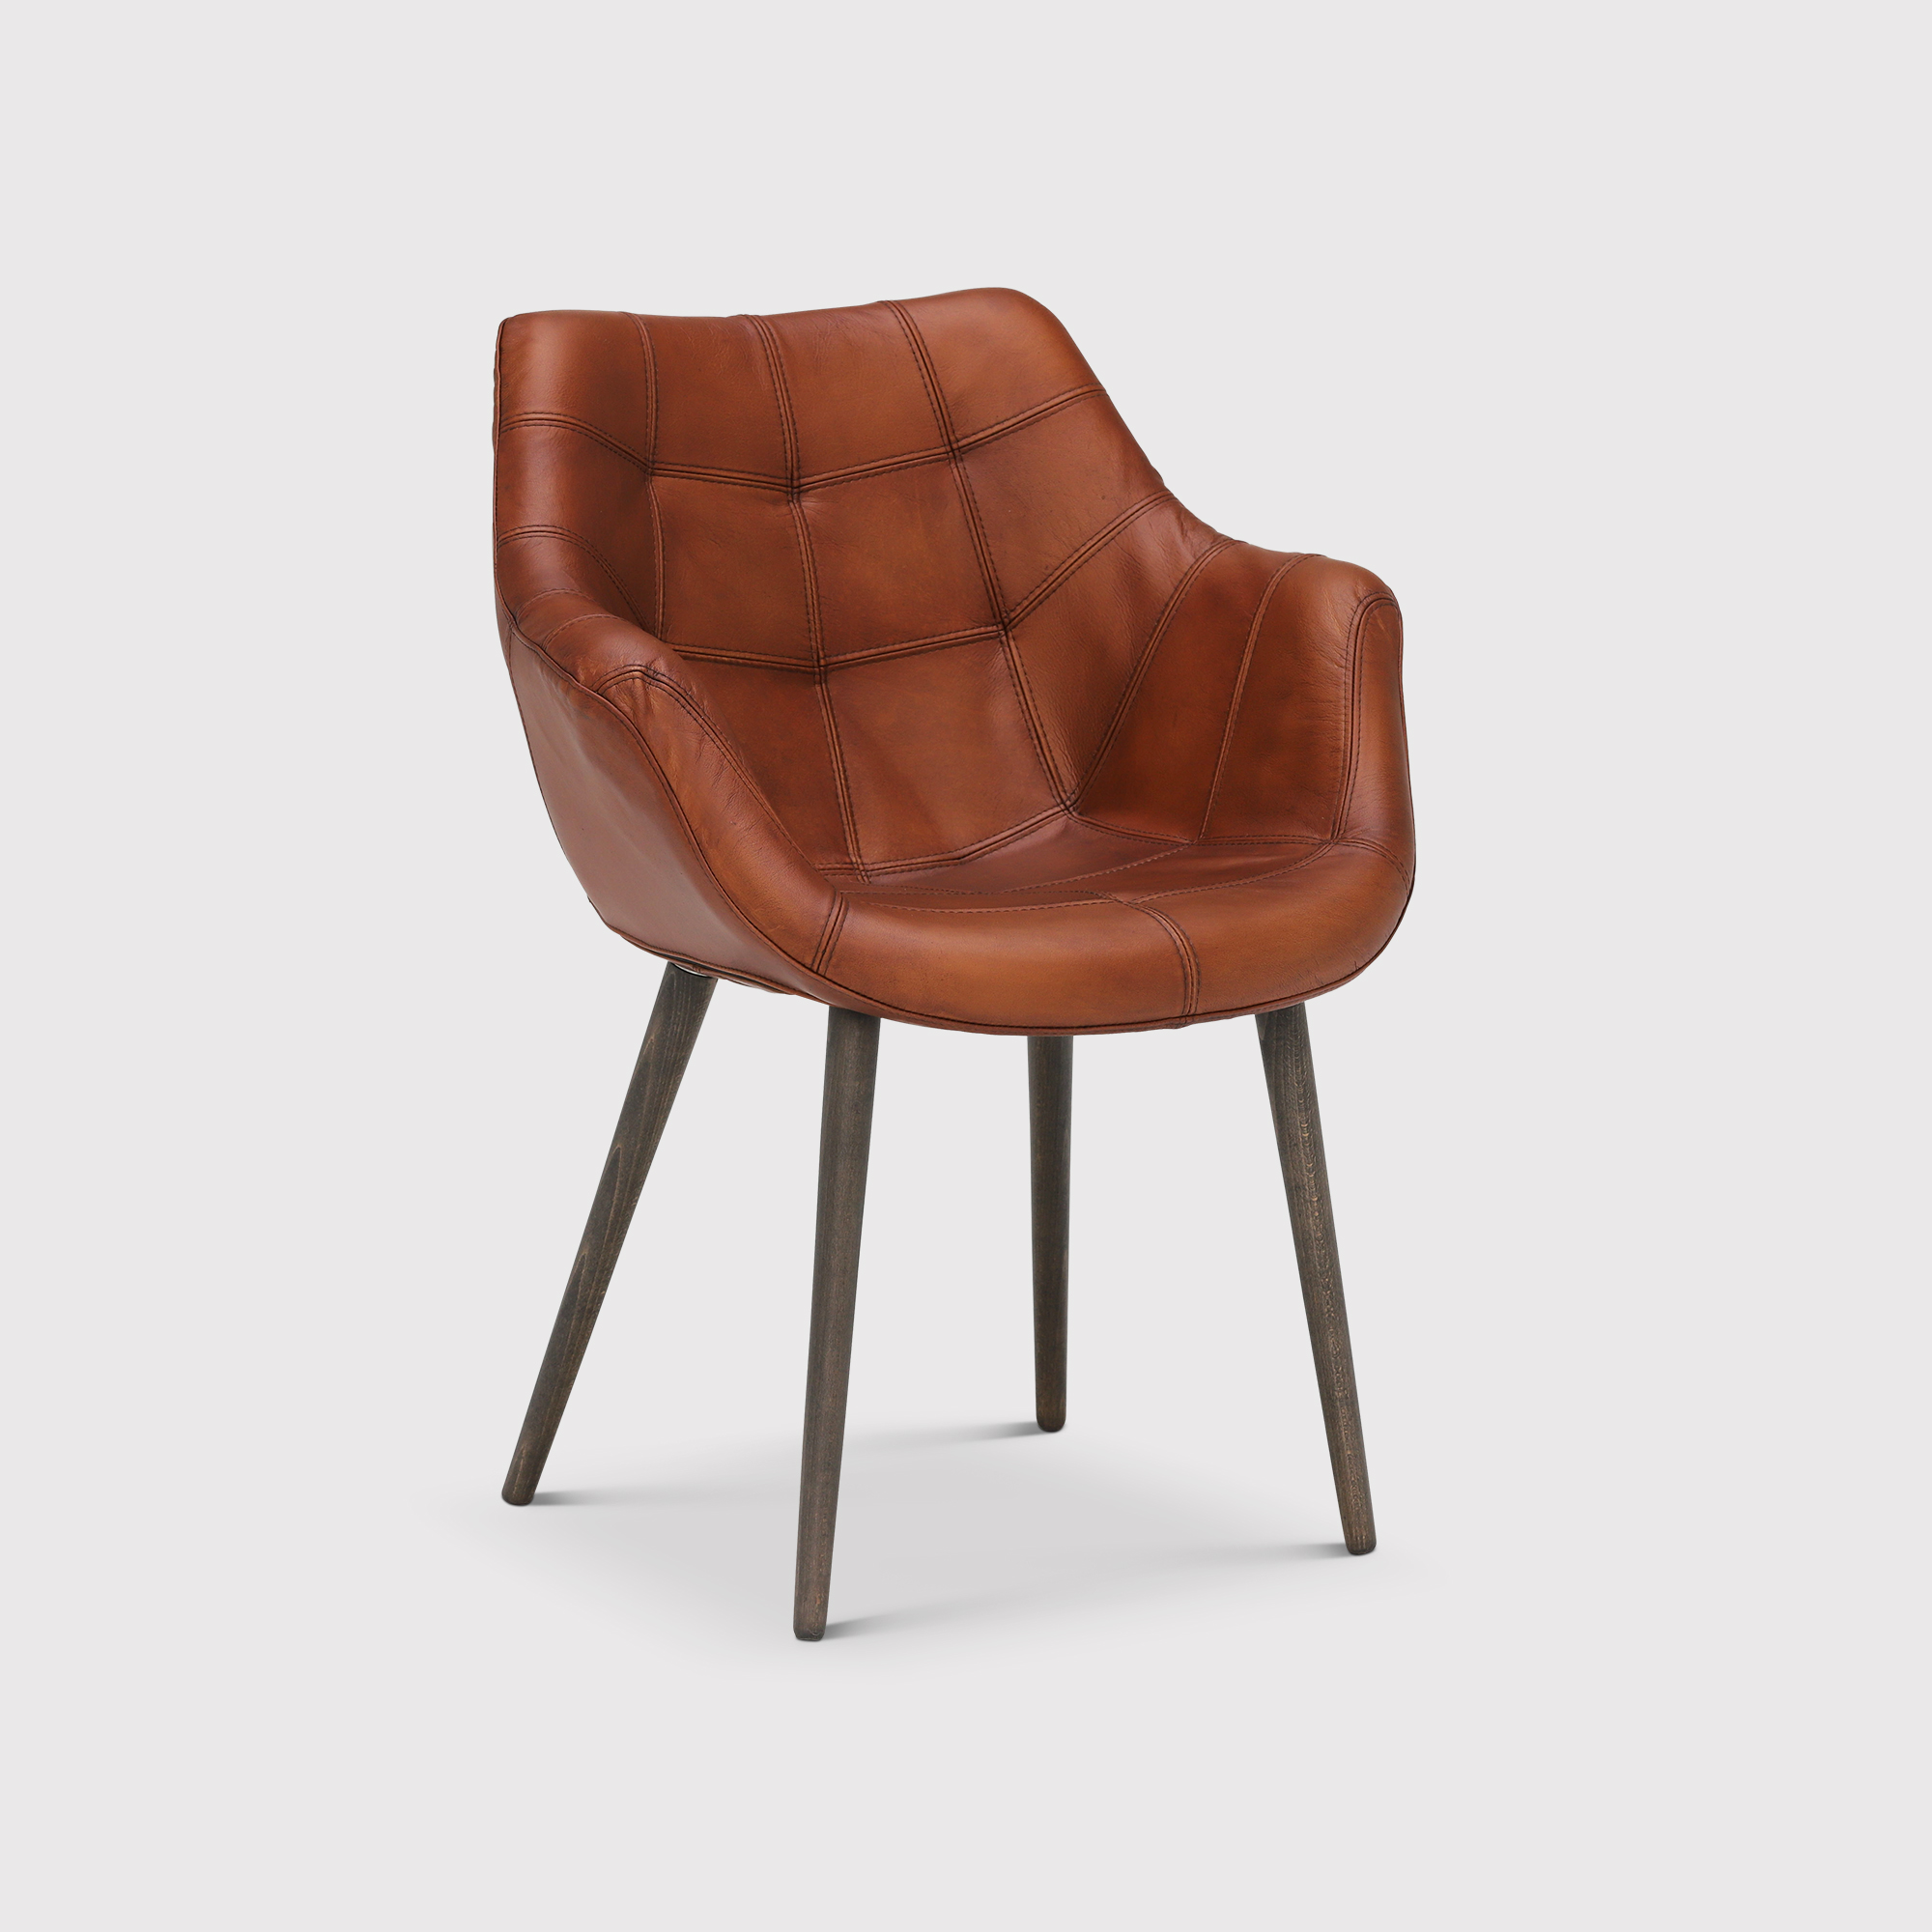 Pure Furniture Birinus Dining Chair, Brown Leather | Barker & Stonehouse